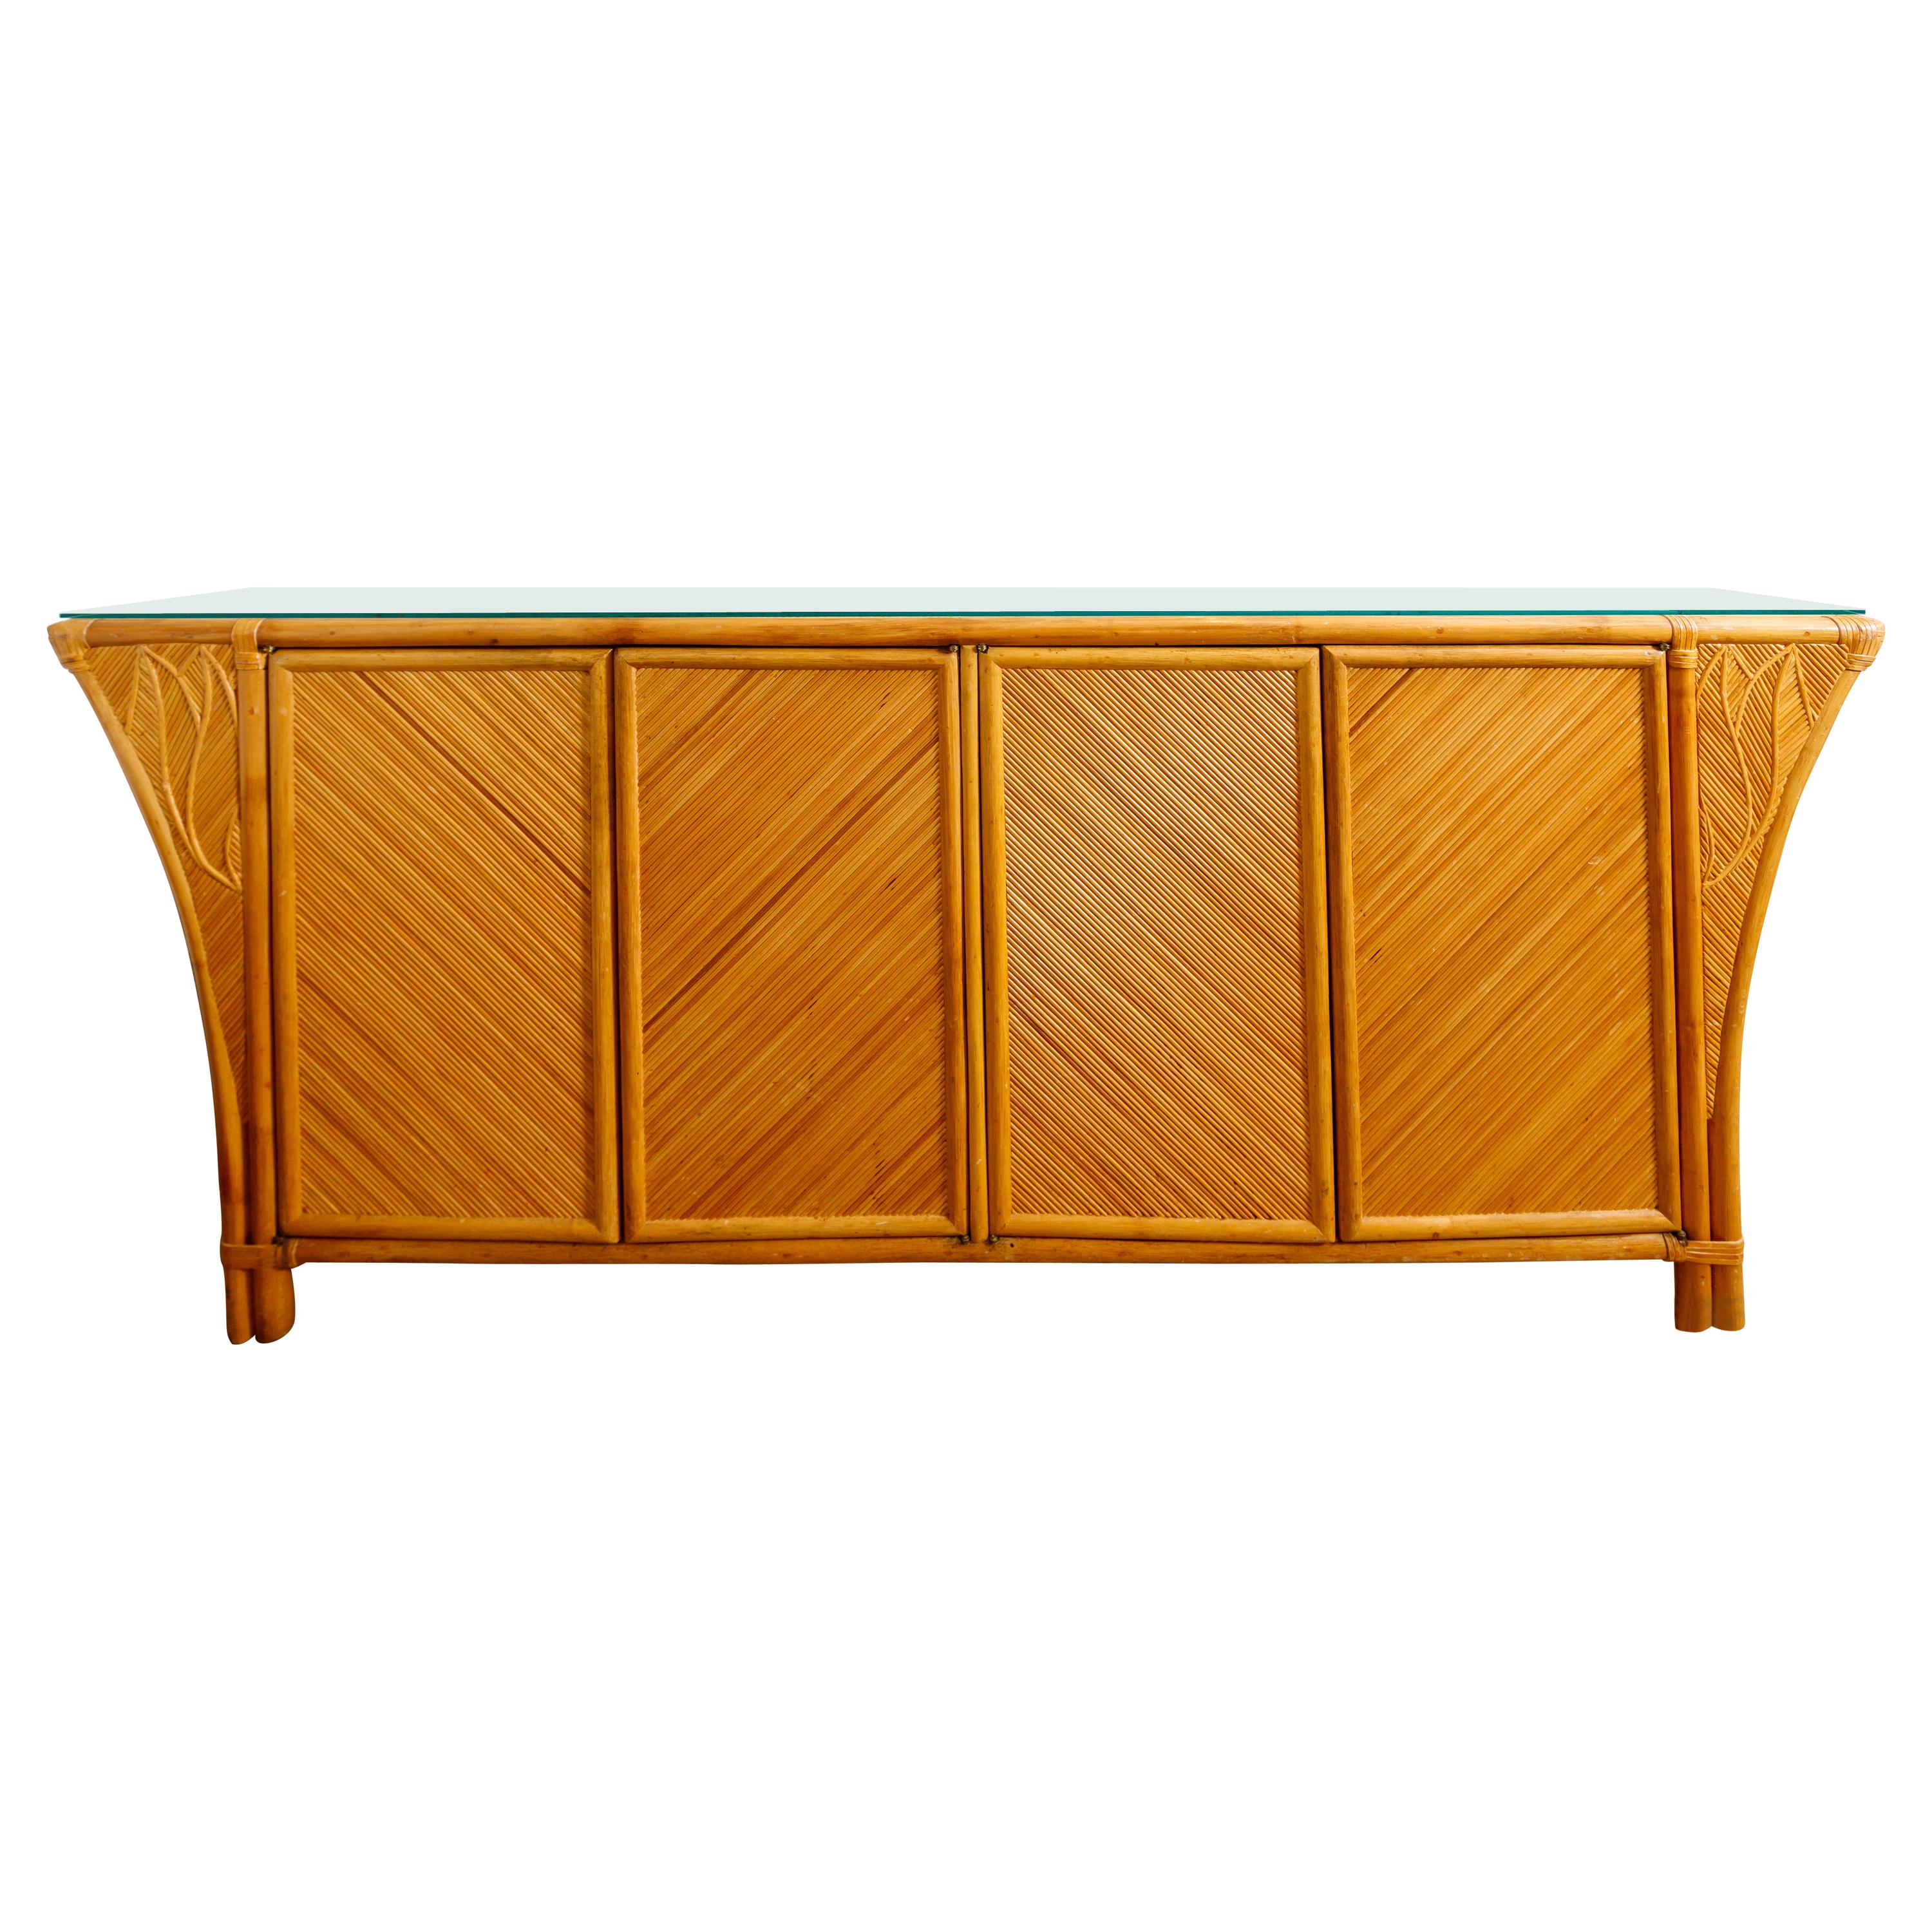 Bamboo Credenza Featuring Four Doors, Interior Shelving and Glass Top For Sale